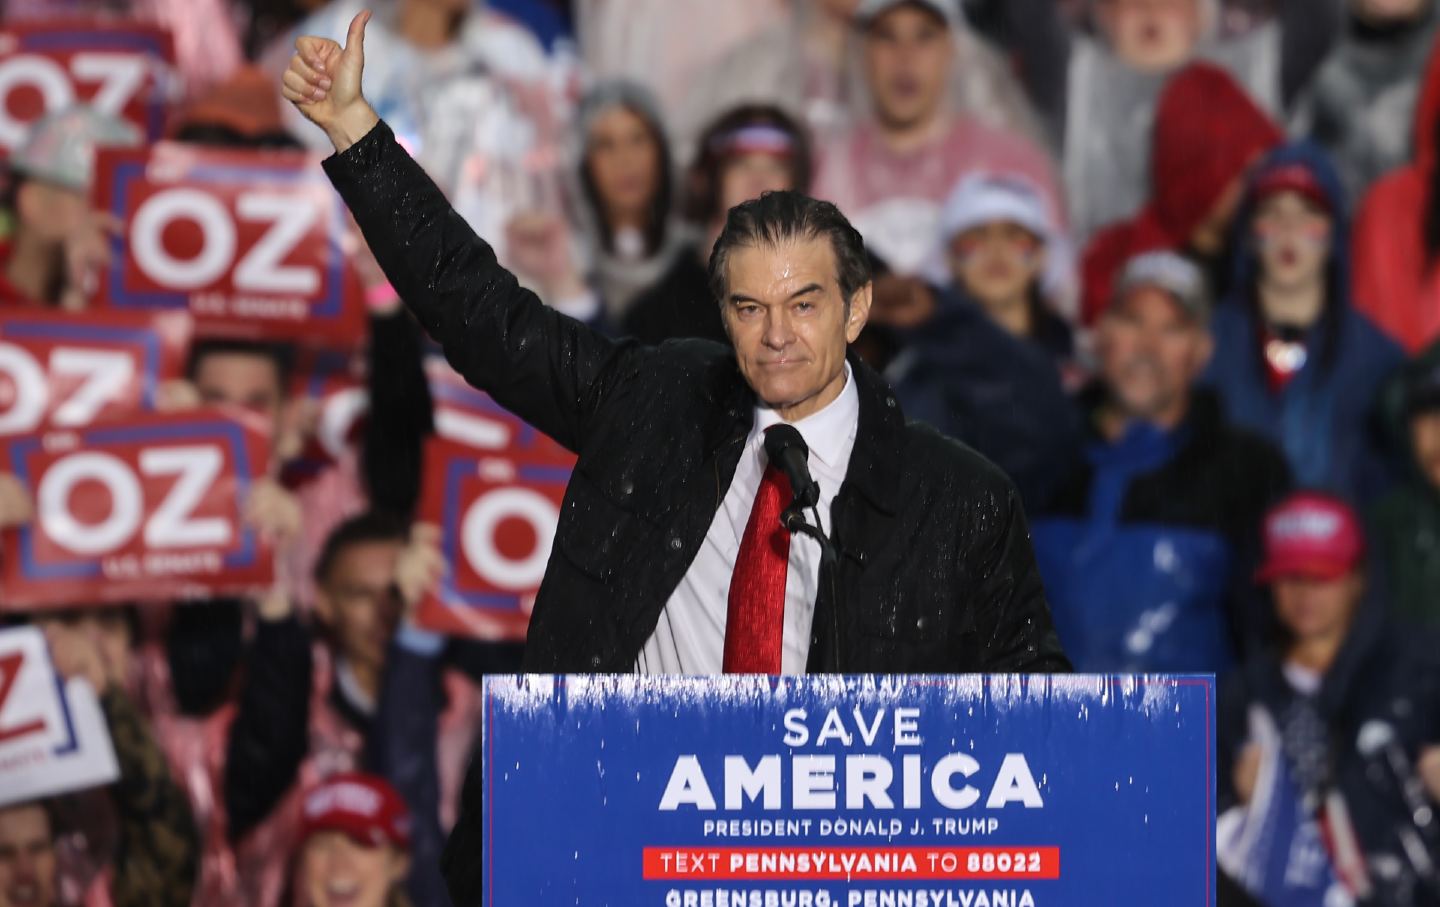 Dr. Oz’s Senate Campaign May Come Back to Haunt Us After All